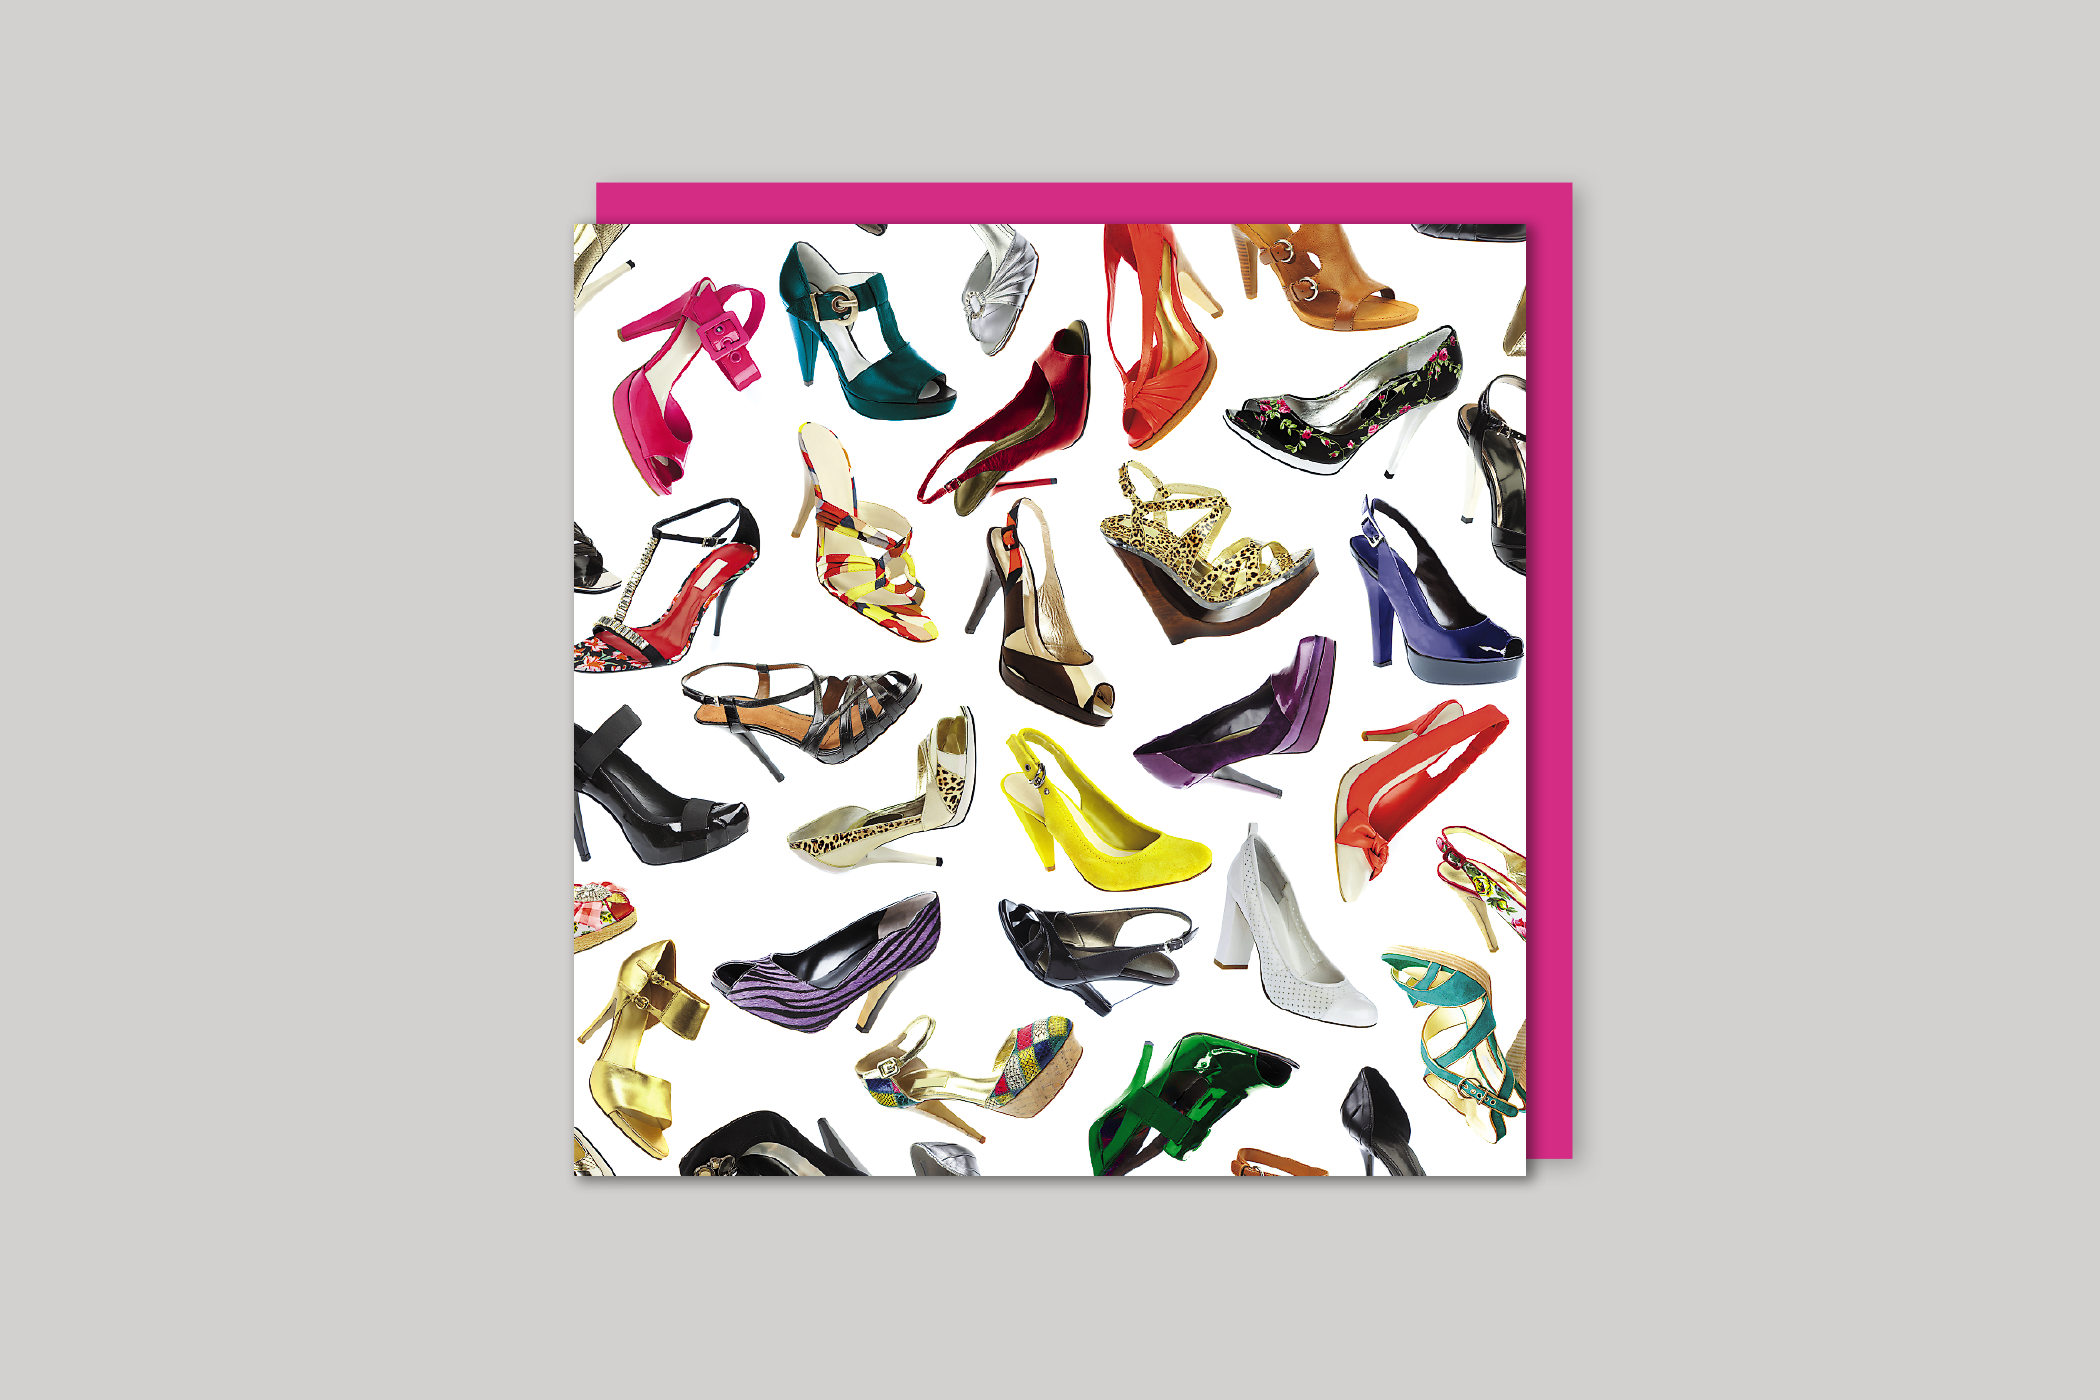 High Heels from Exposure range of photographic cards by Icon, back page.